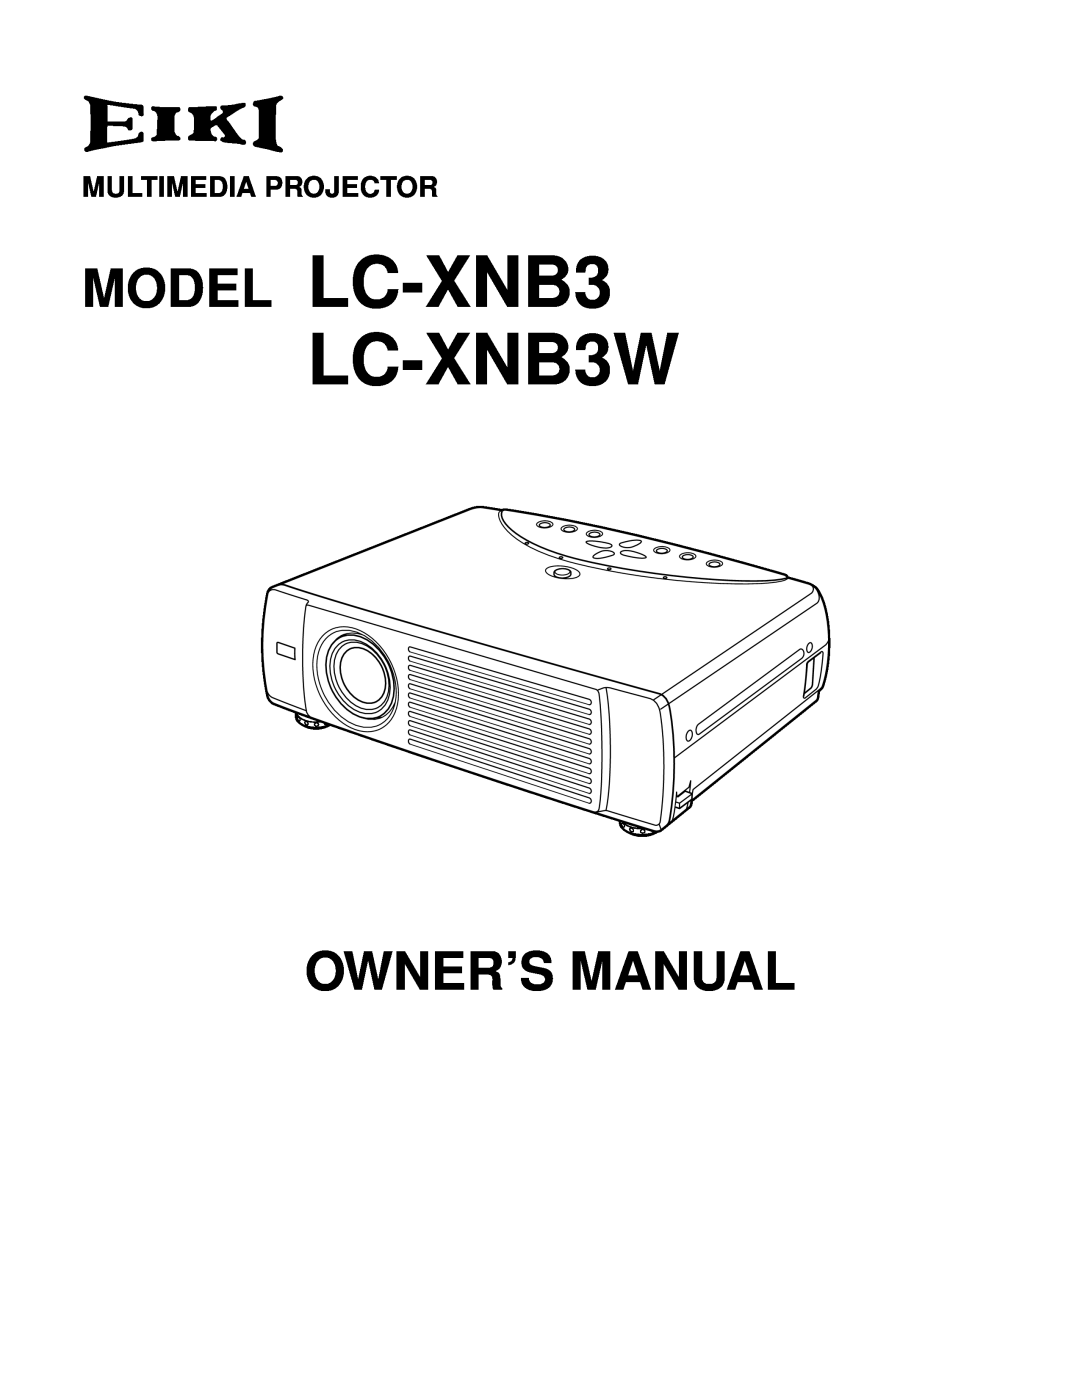 Eiki specifications KEY FEATURES Model LC-XNB3, XGA Notebook Projector LC-XNB3, SPECIFICATIONS Model LC-XNB3 